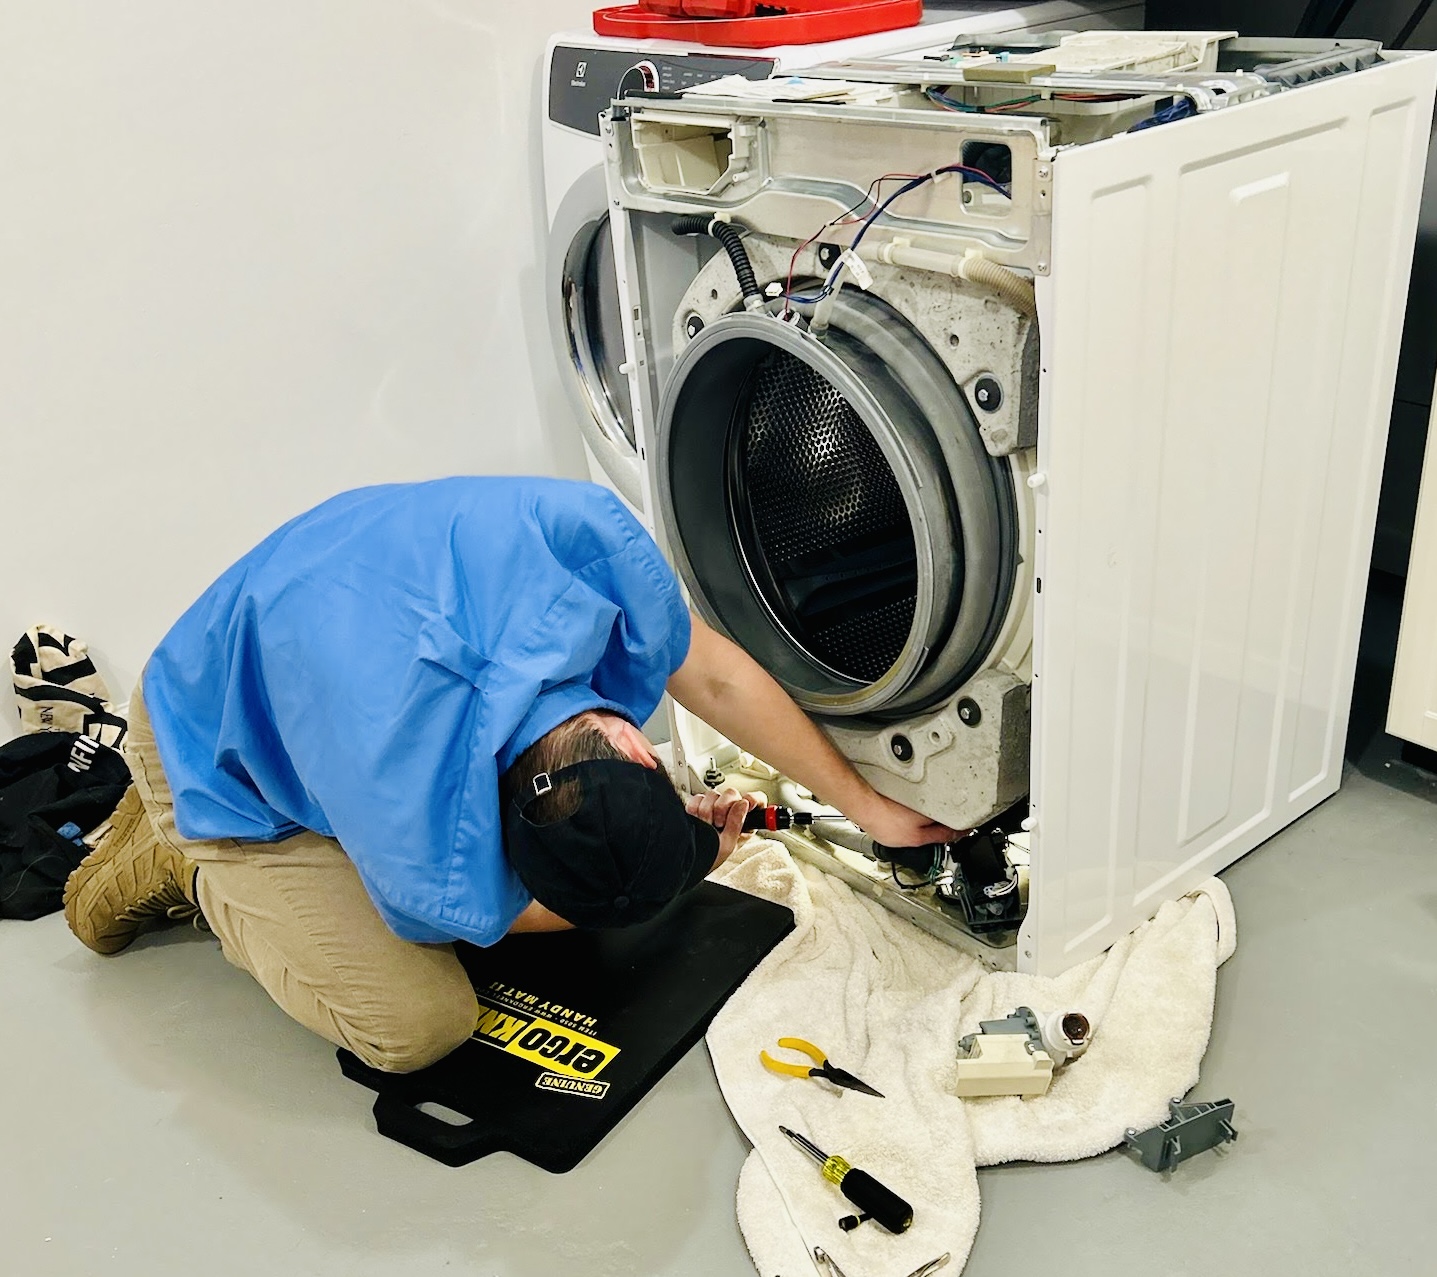 Electrolux Appliance Repair by Precision Appliance Services  Best Luxury Repair Experts